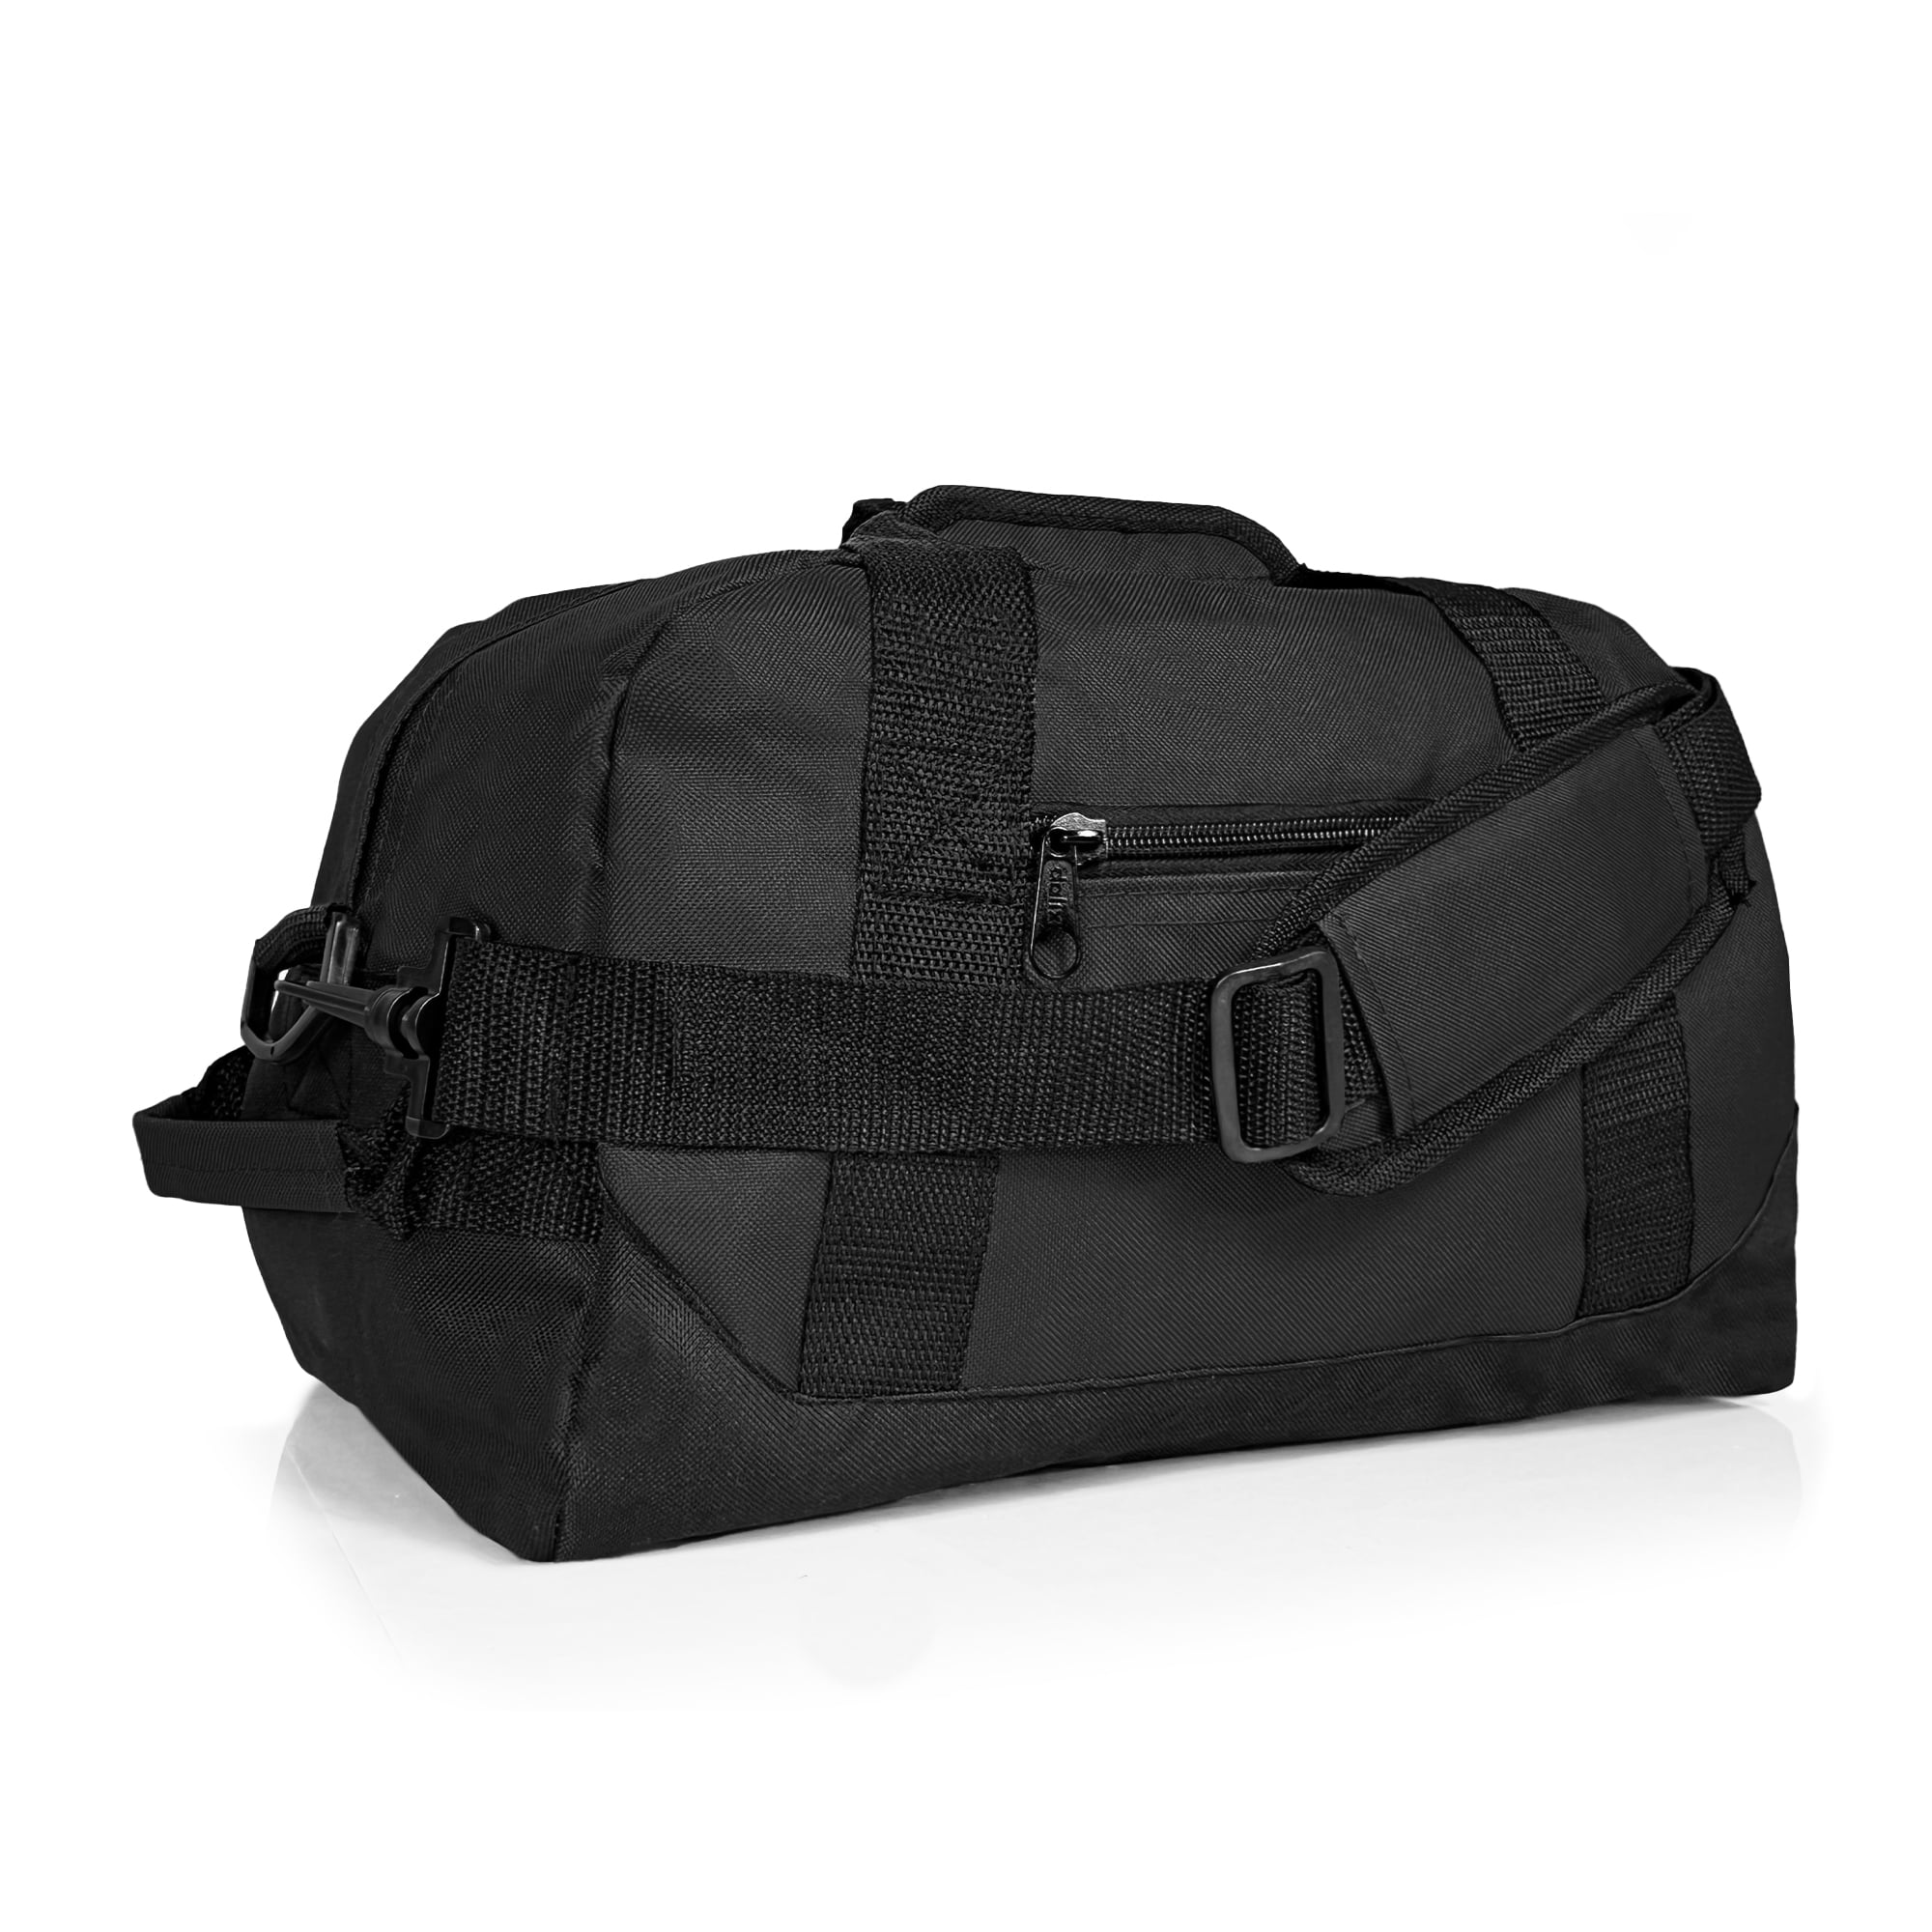 Small duffle bag with tonal Double G